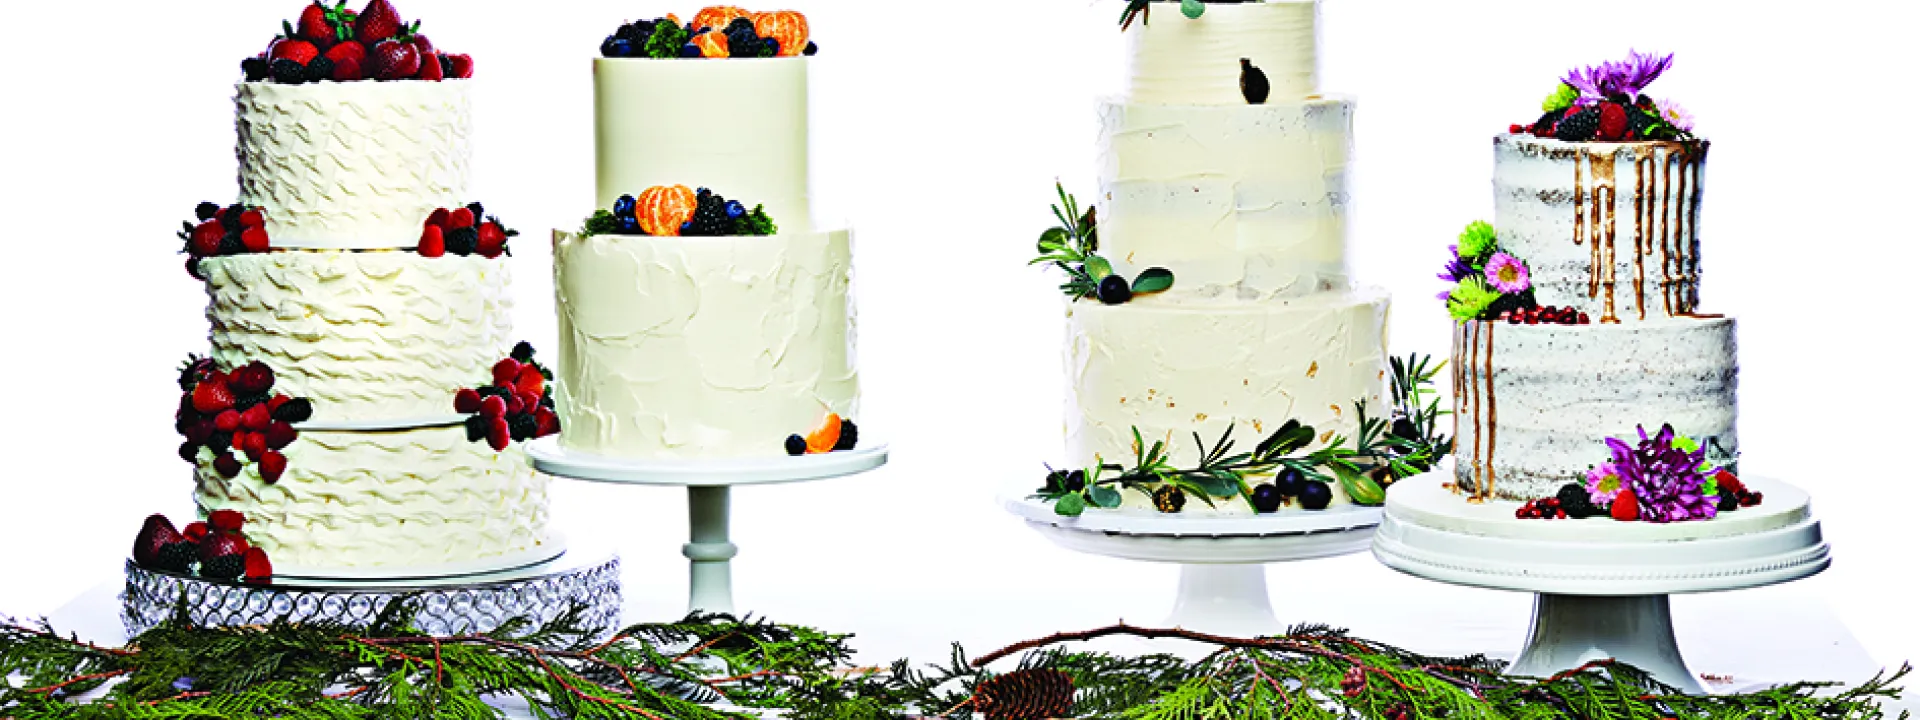 Three tiered, buttercream wedding cakes with fruit.